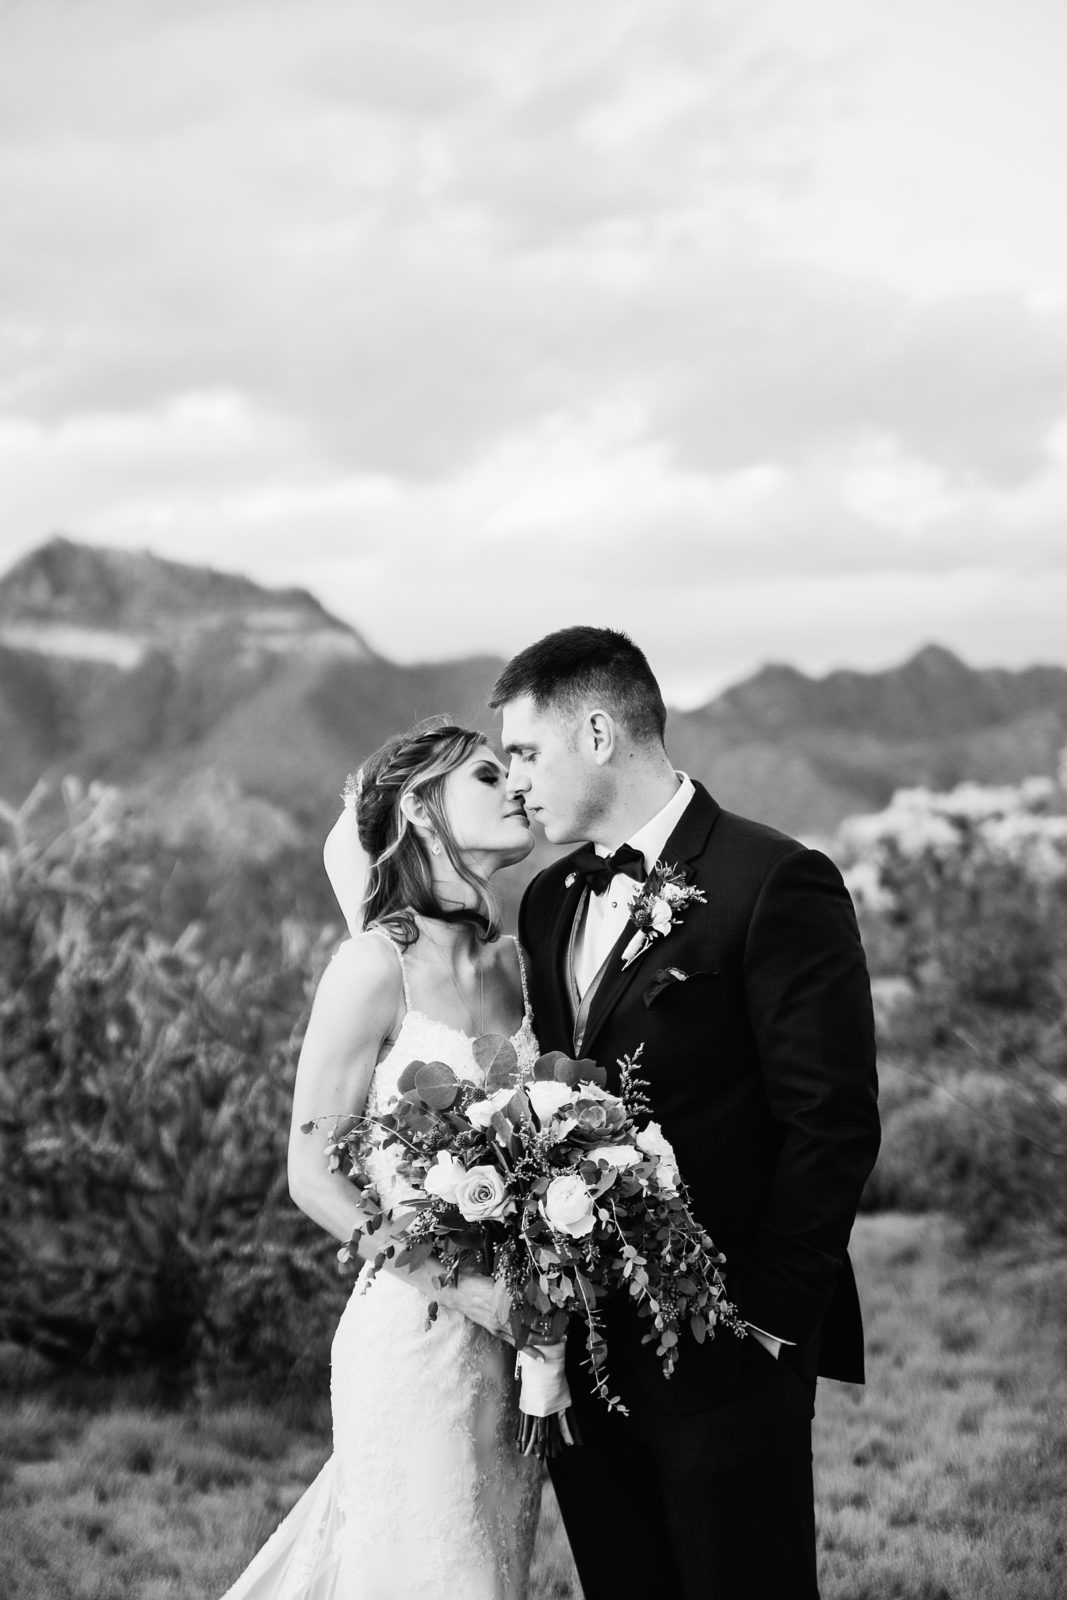 Bride and groom share a romantic moment in the desert on their wedding day by Arizona wedding photographer PMA Photography.